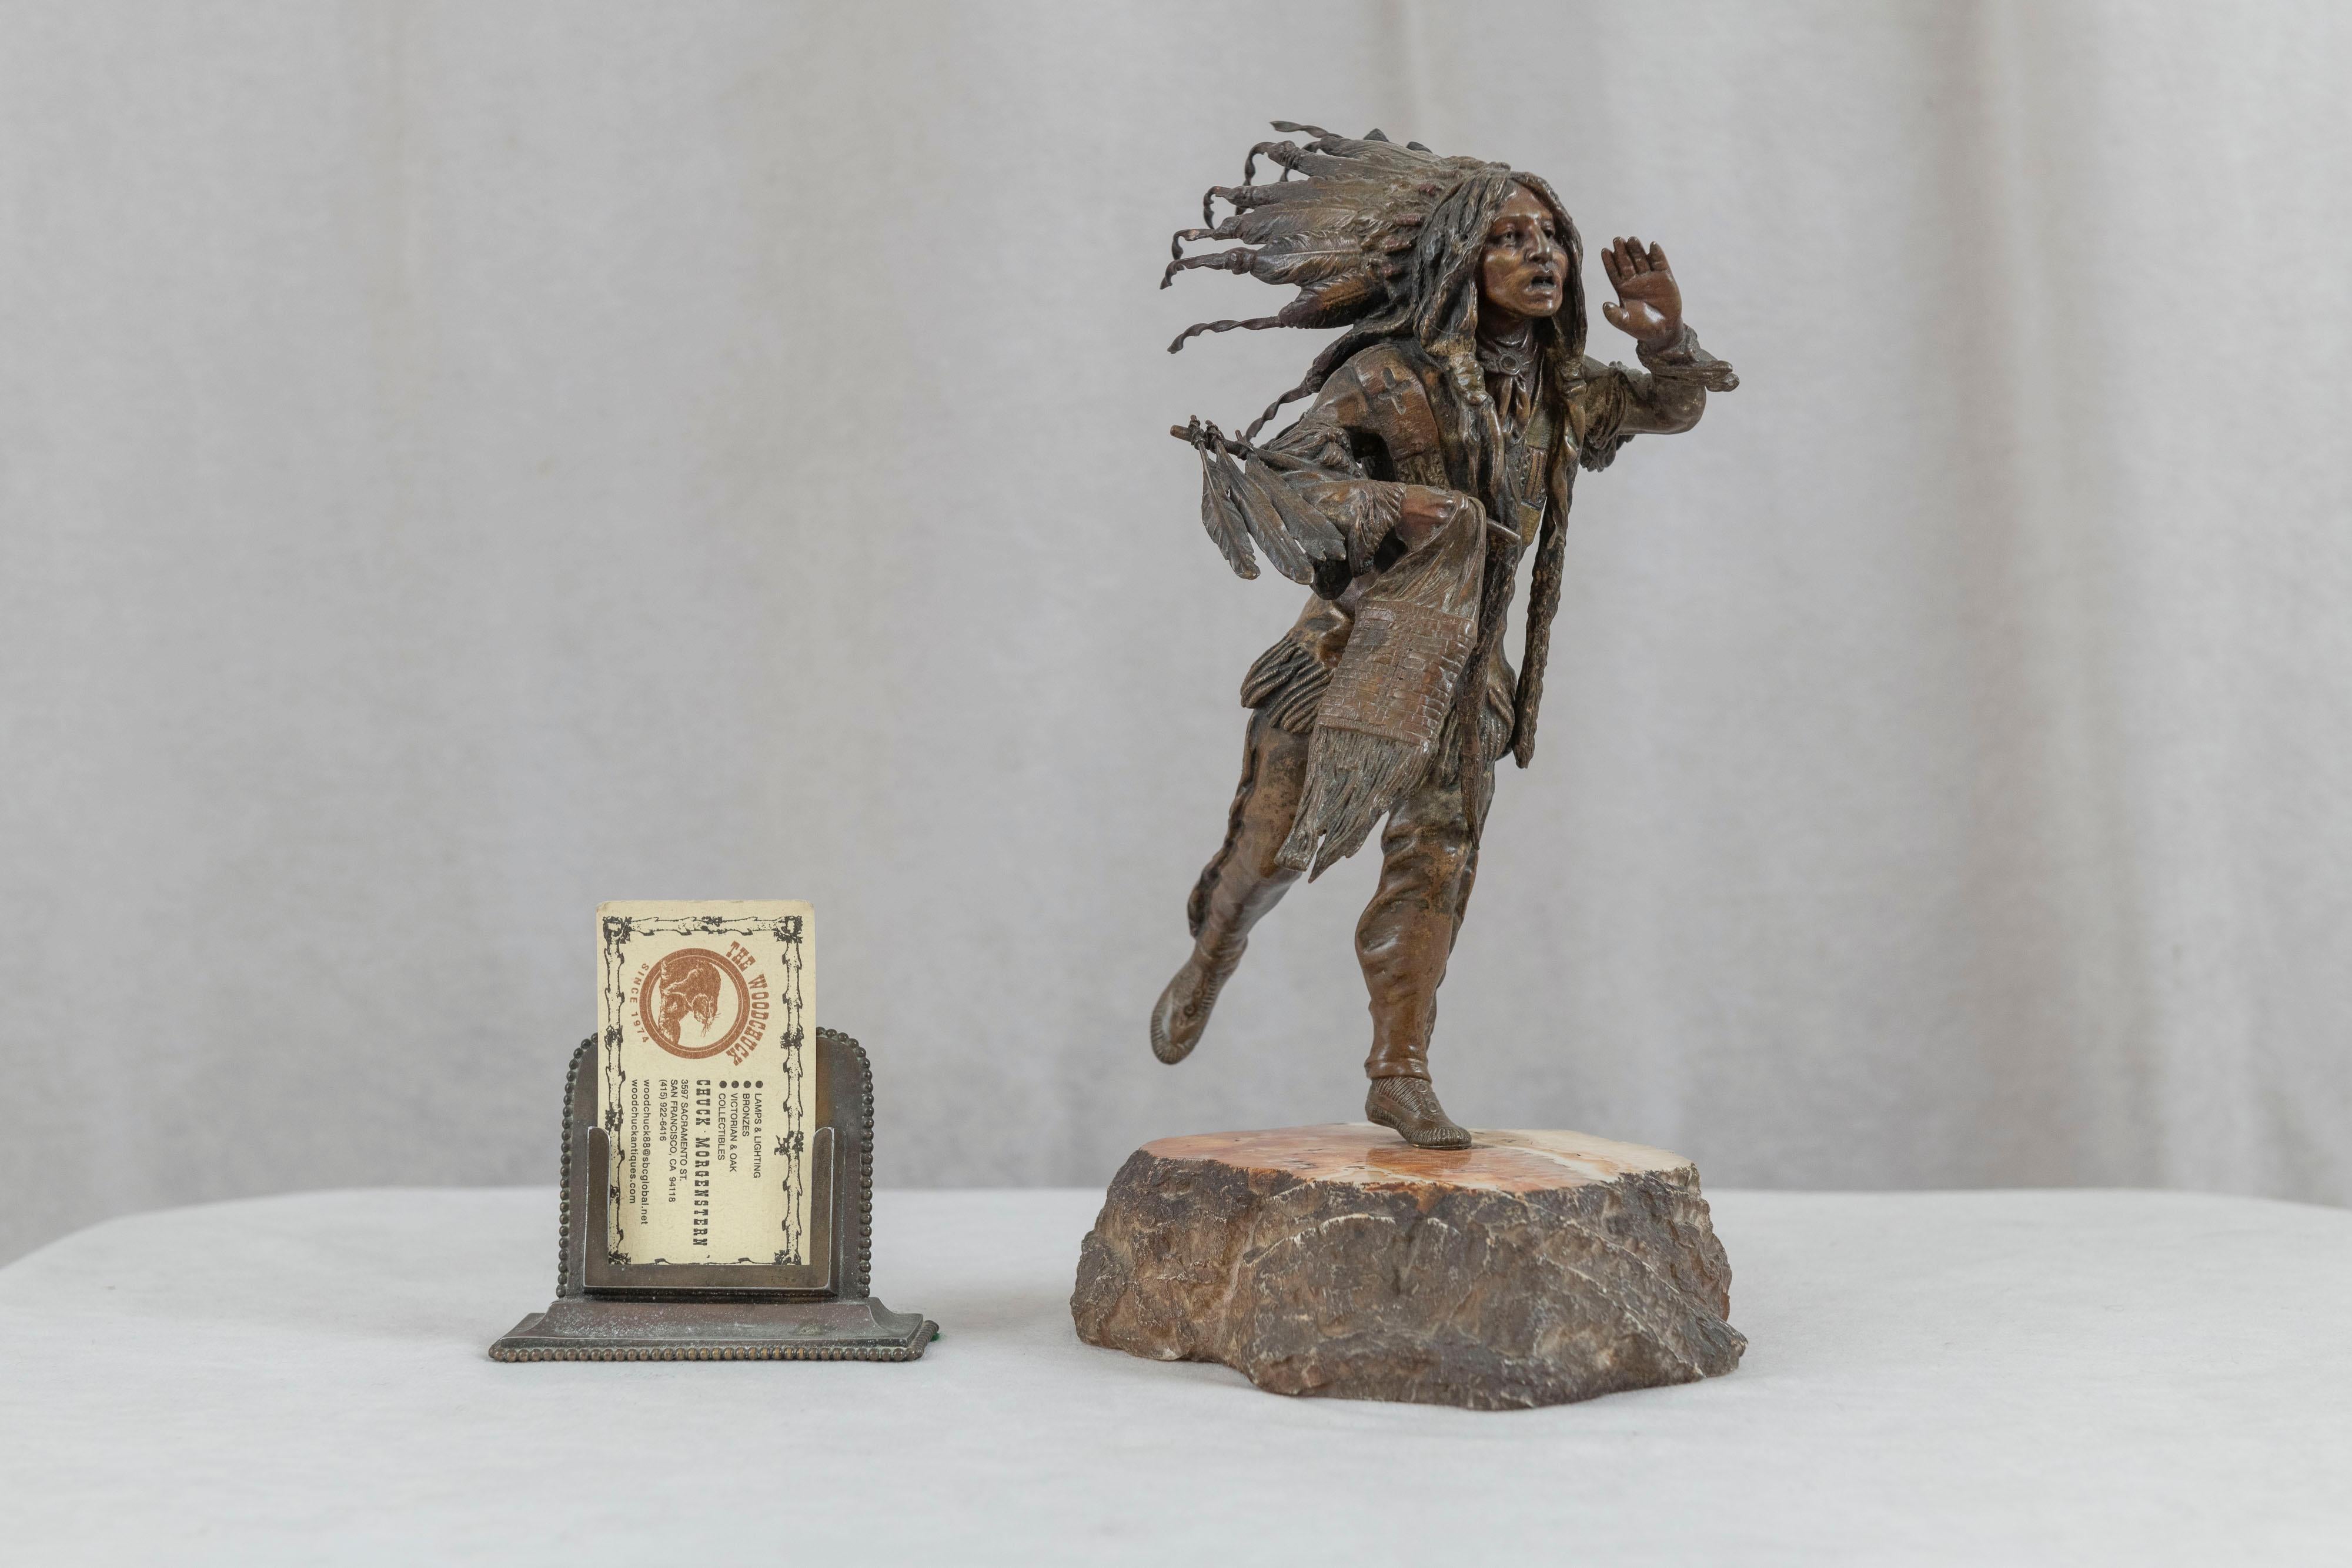 This high quality detailed bronze casting of an Indian Chief is Austrian, and was done by Carl Kauba (1865-1922). Kauba was known for his depiction of our native Americans. He was fascinated with the old west. Known for his attention to detail and